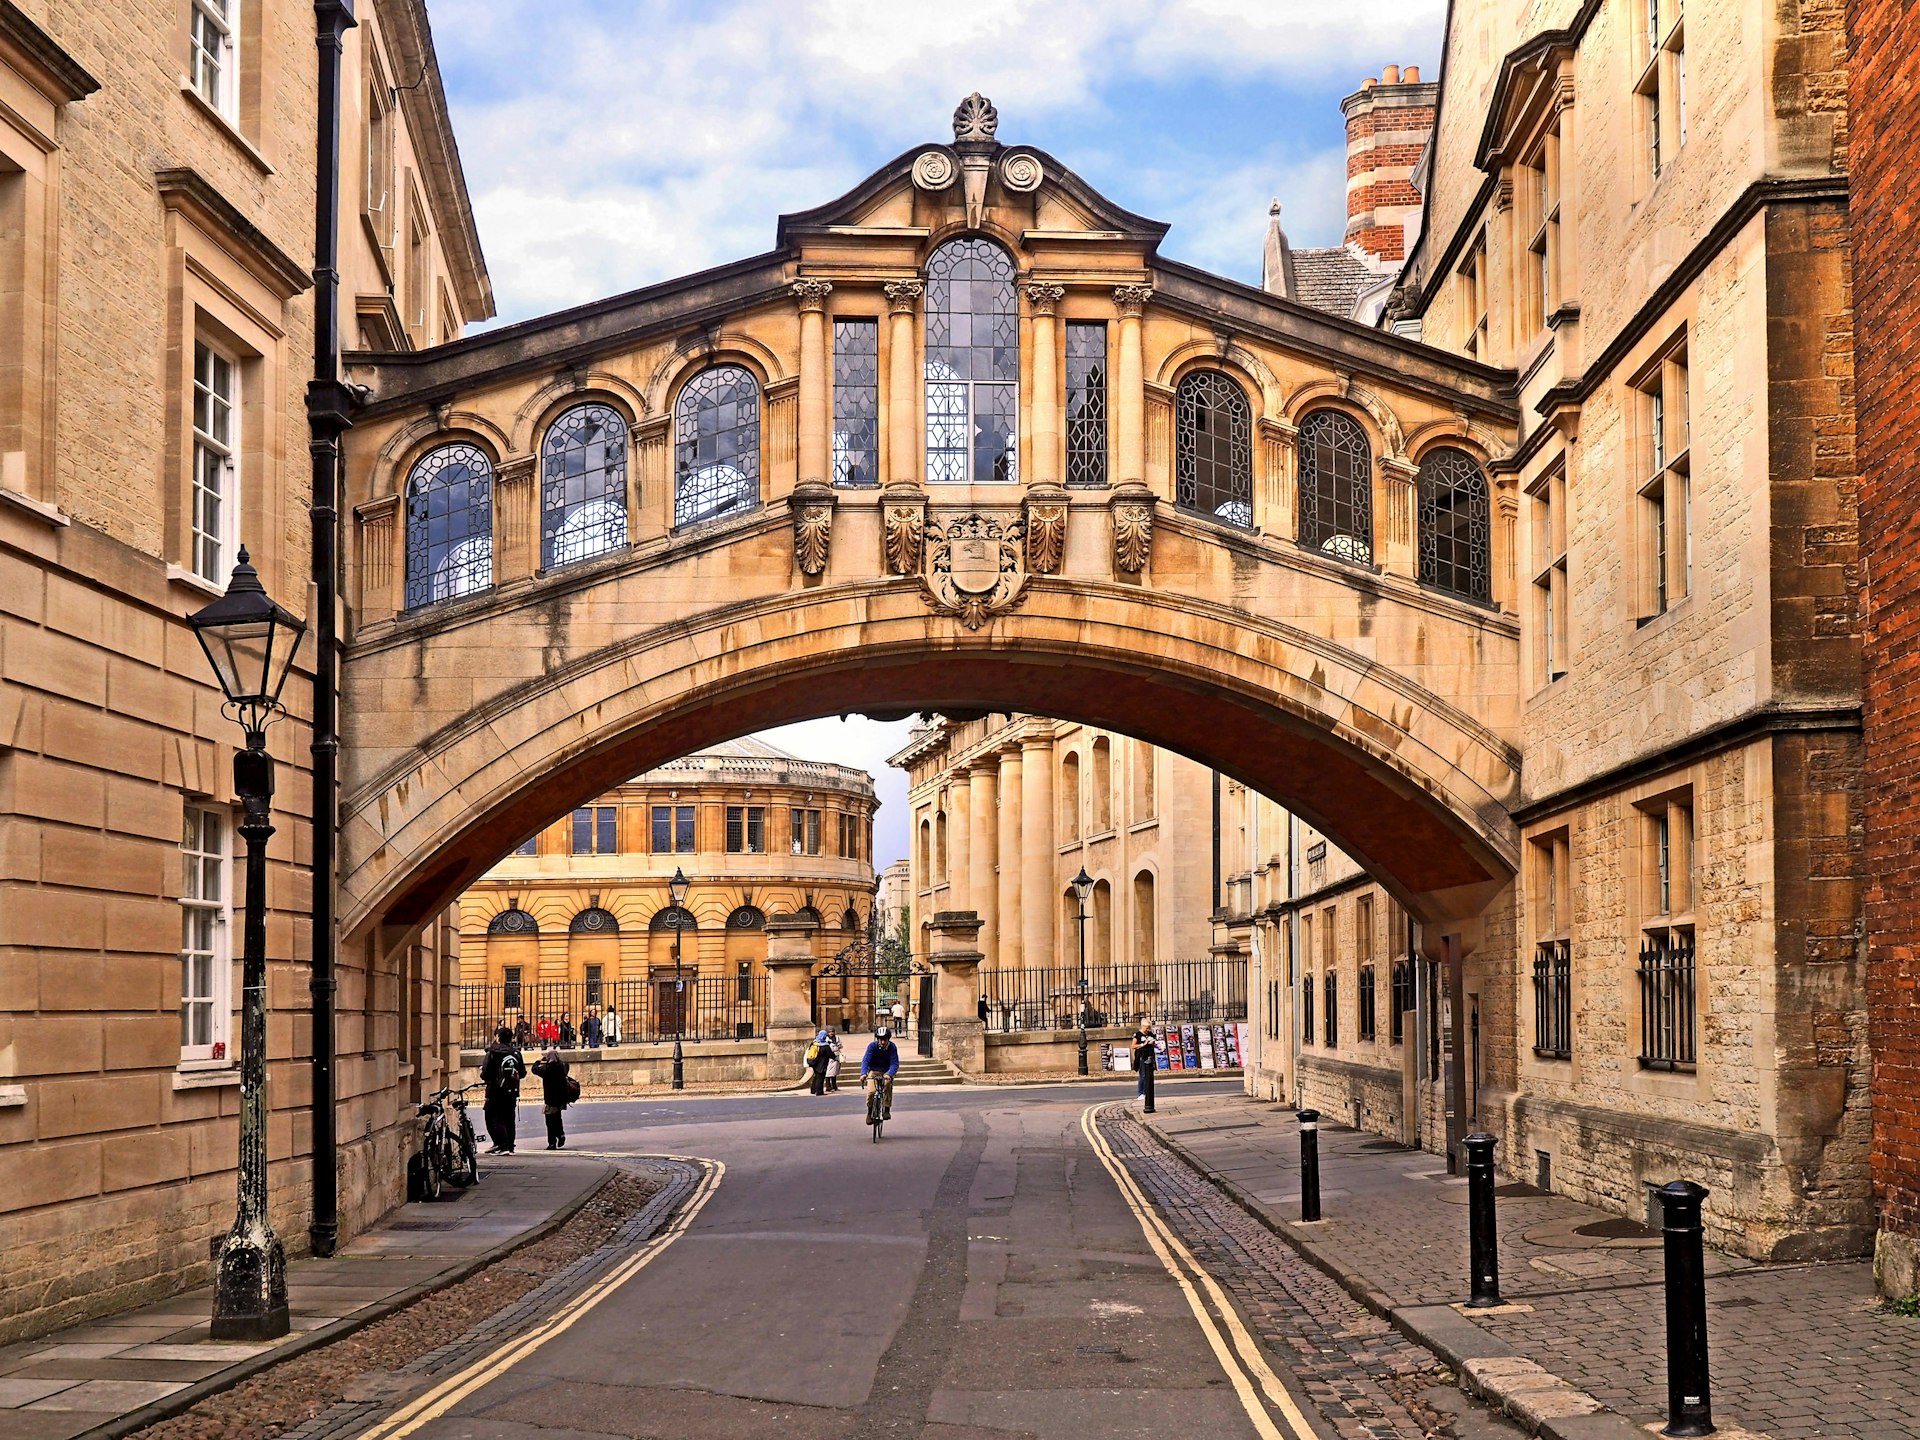 A Venetian-style bridge built over a small road in Oxford